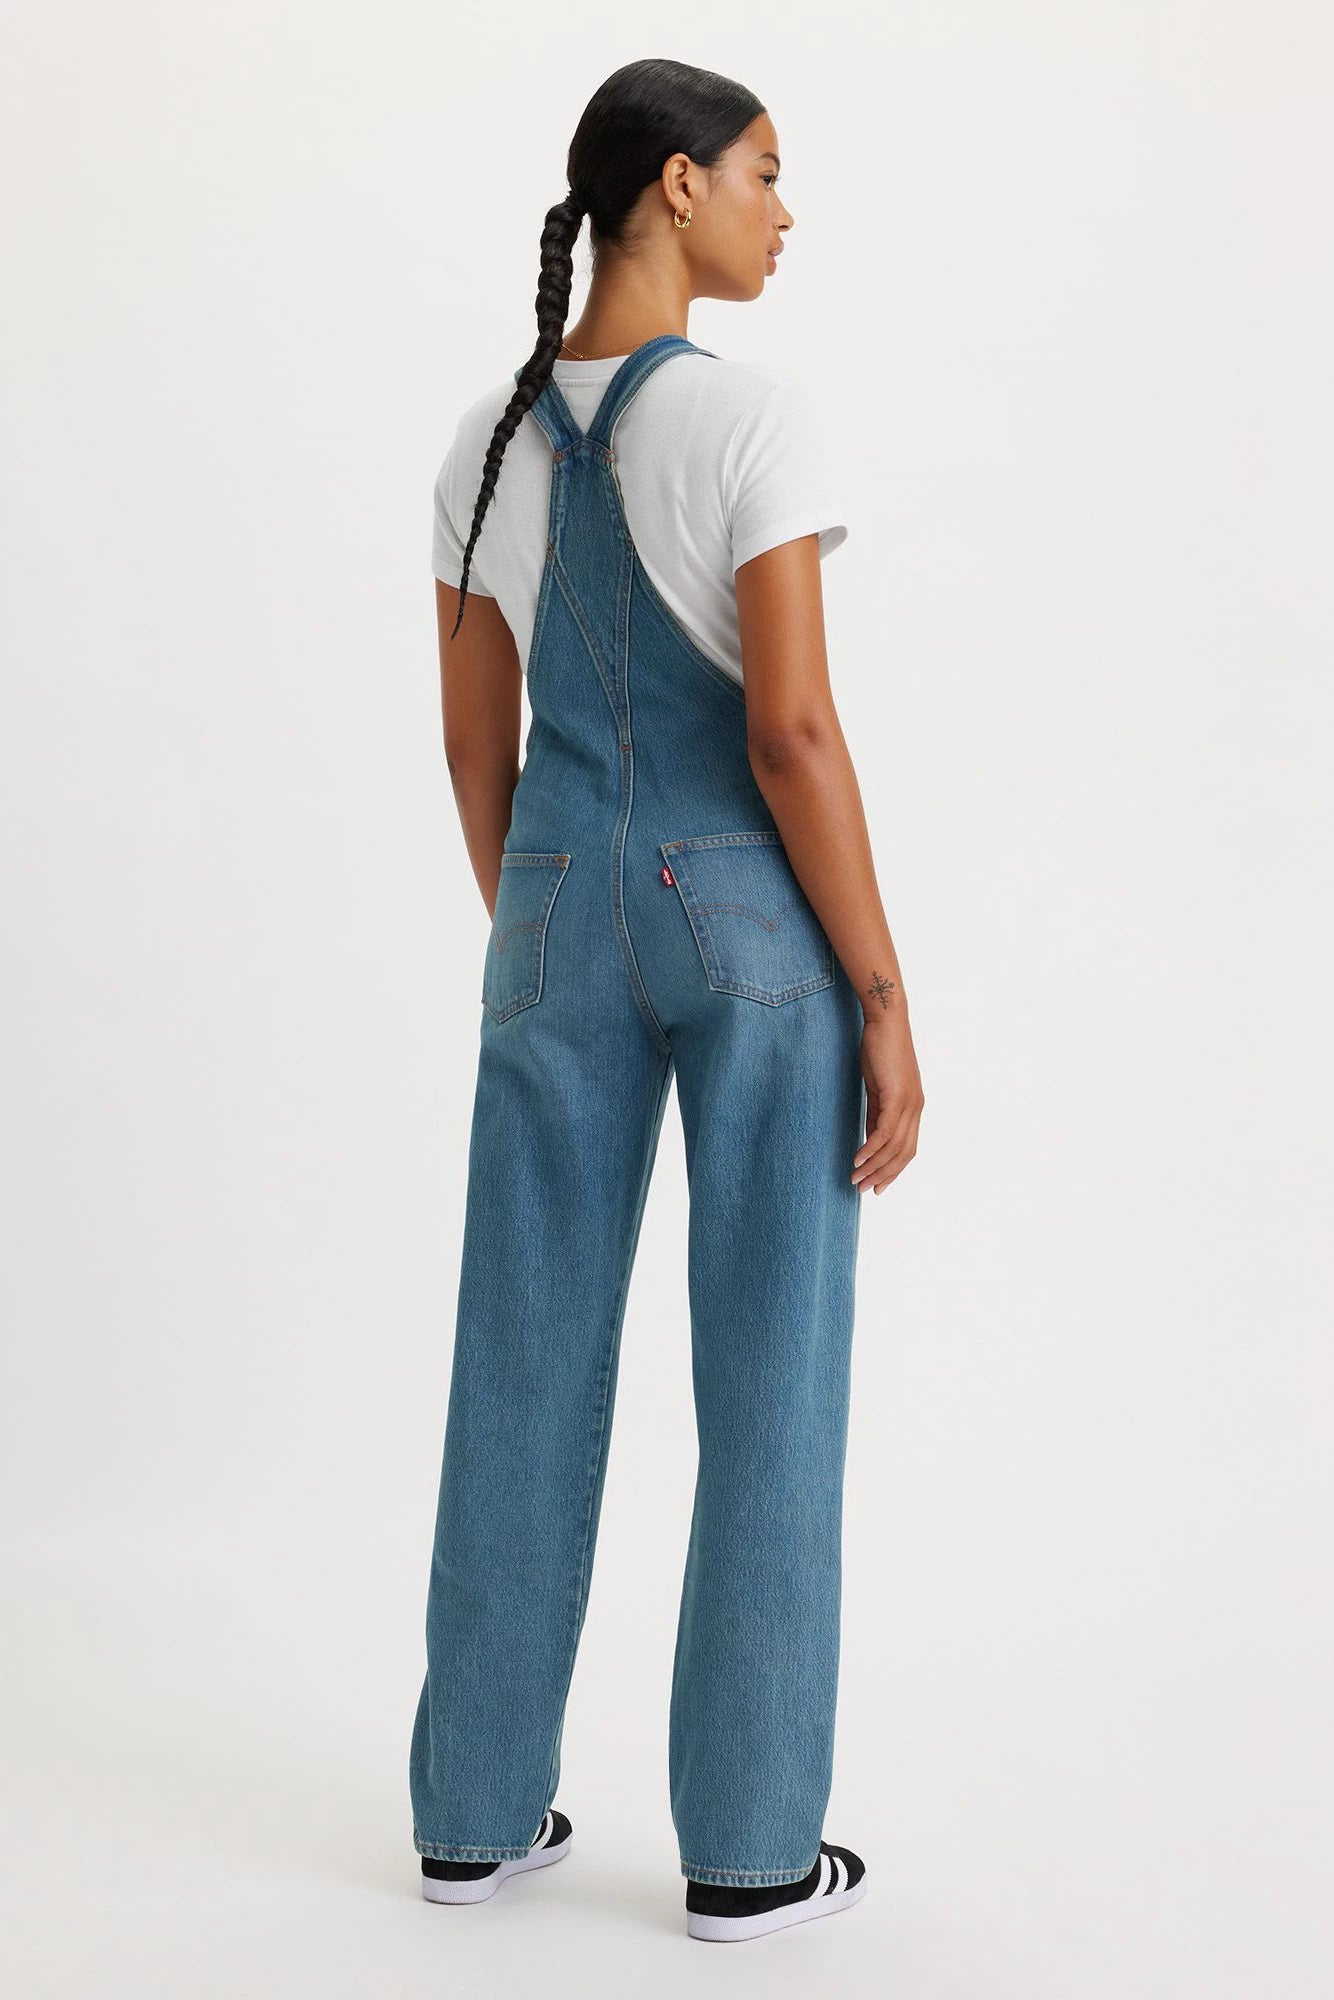 Vintage Overall Pants Levi's   